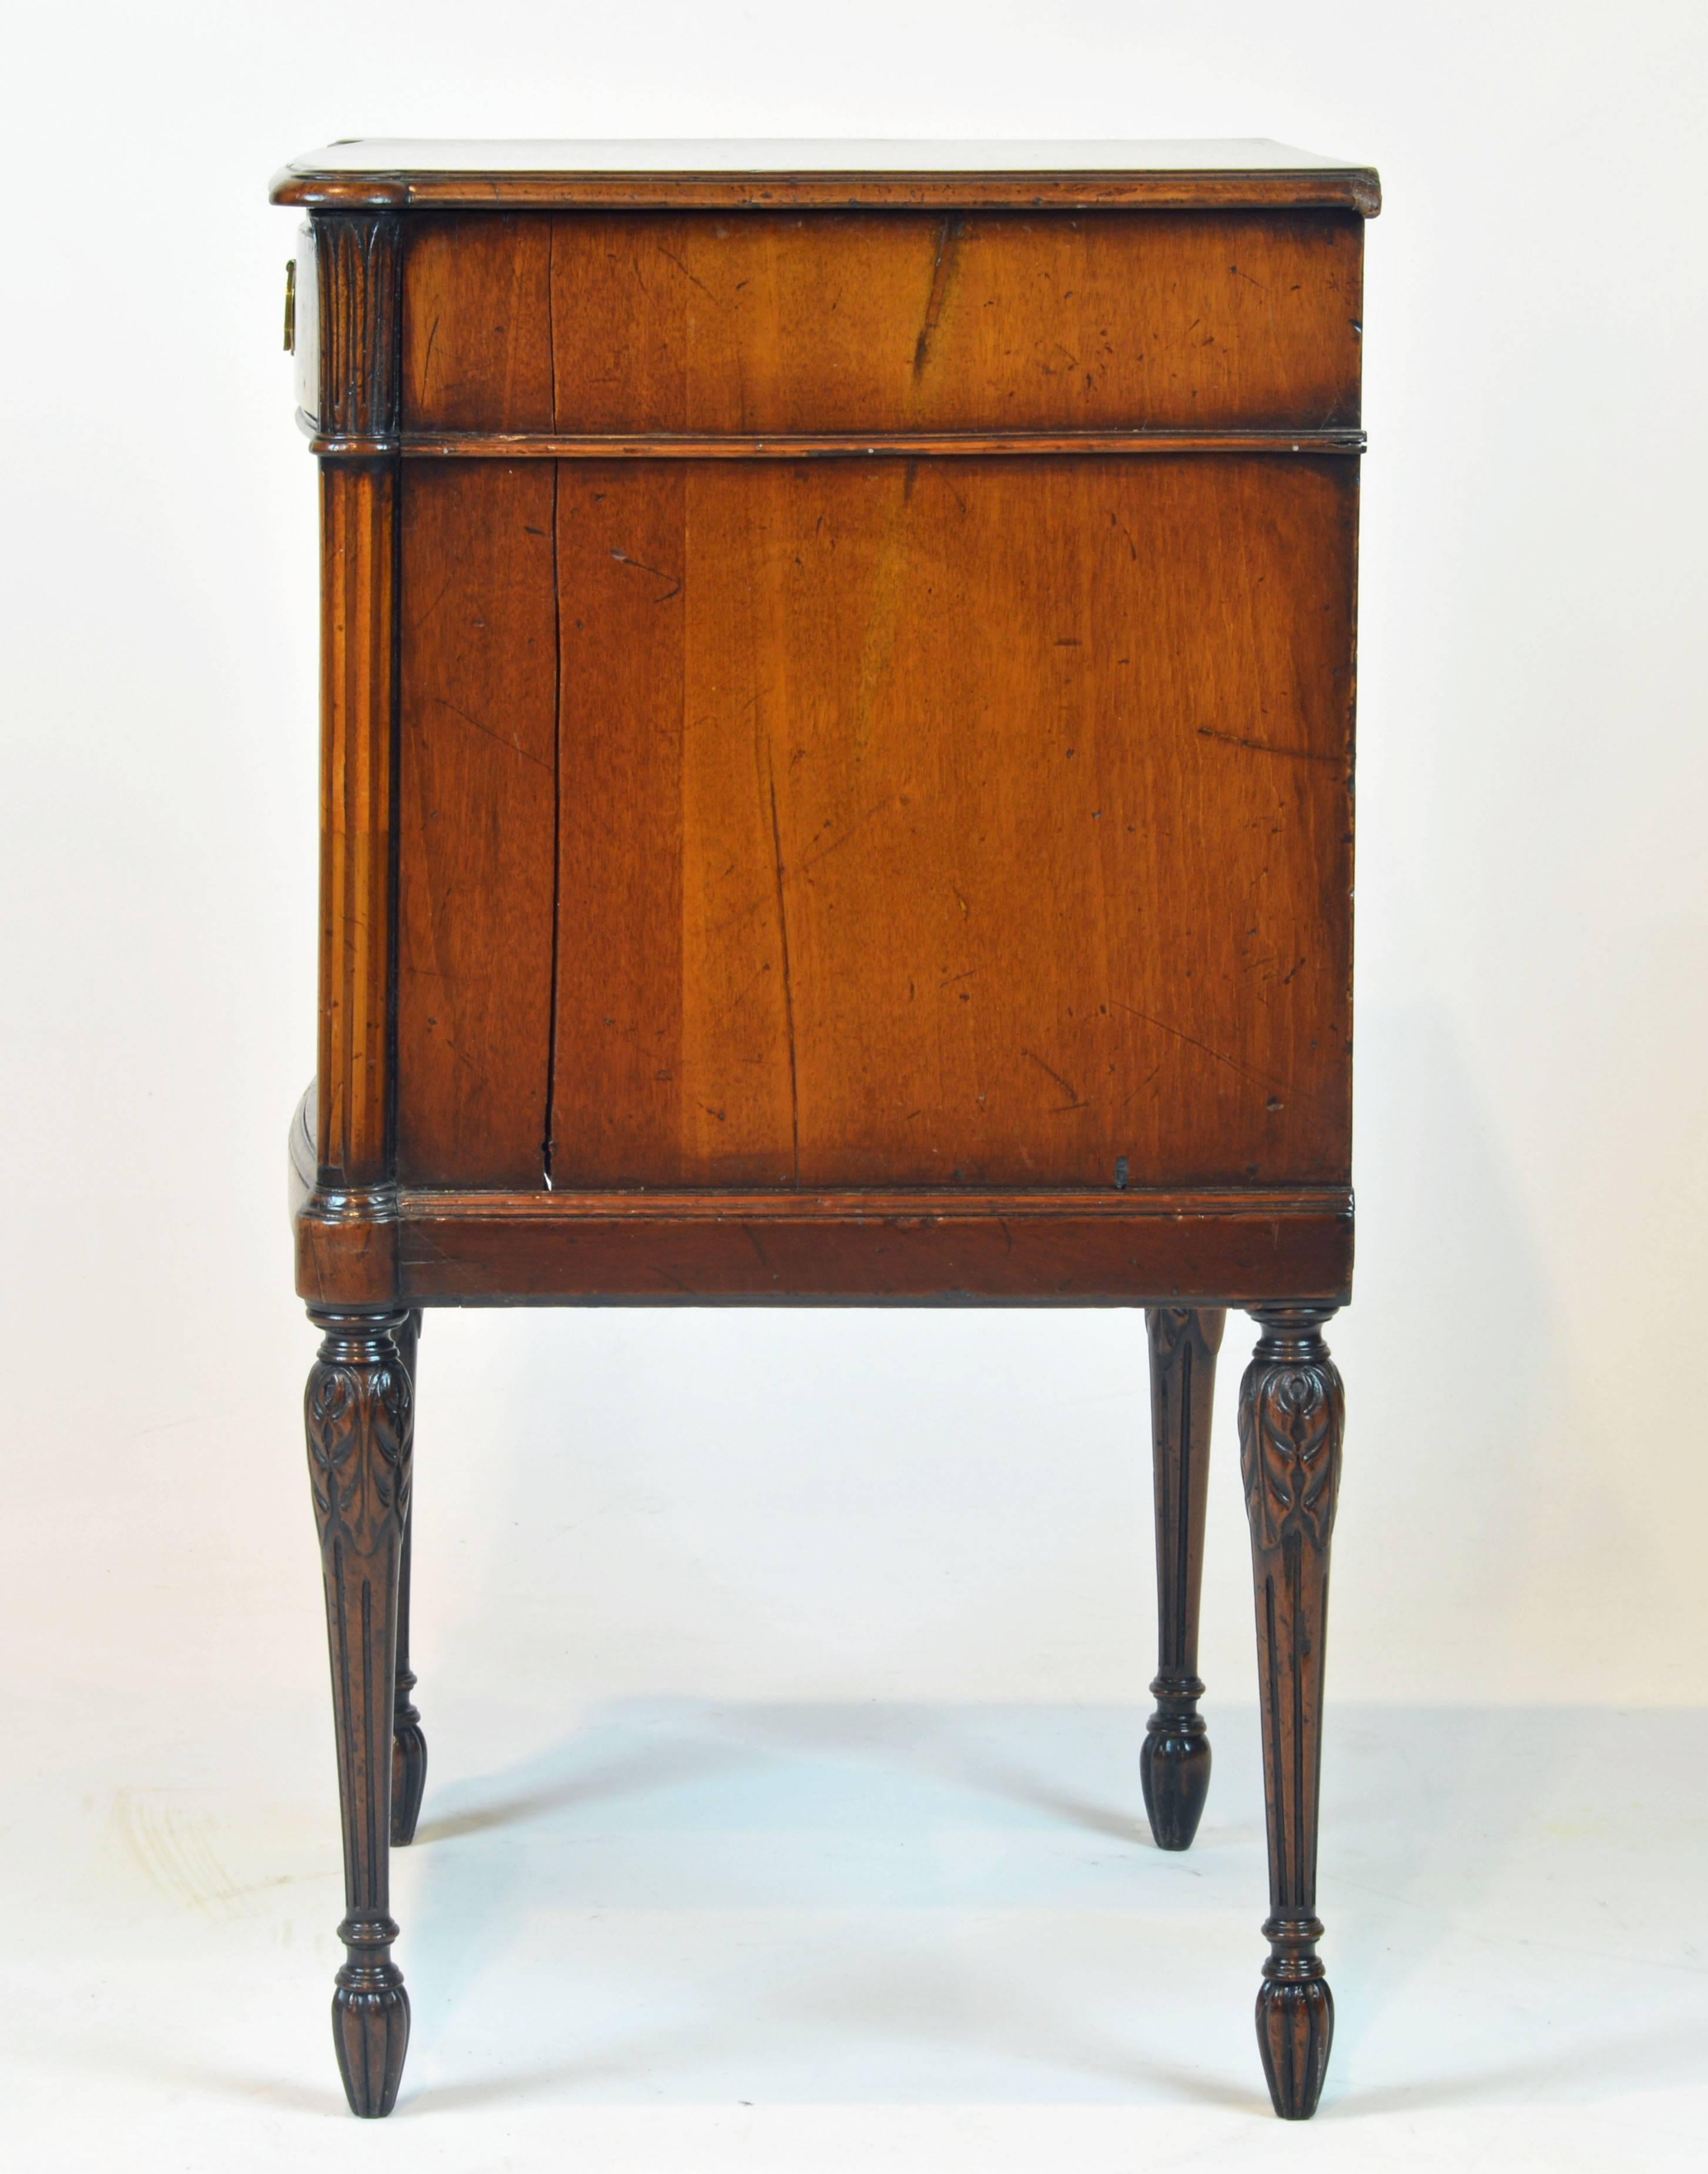 Wood English 19th Century Sheraton Revival Inlaid One Drawer Book Stand or Side Table